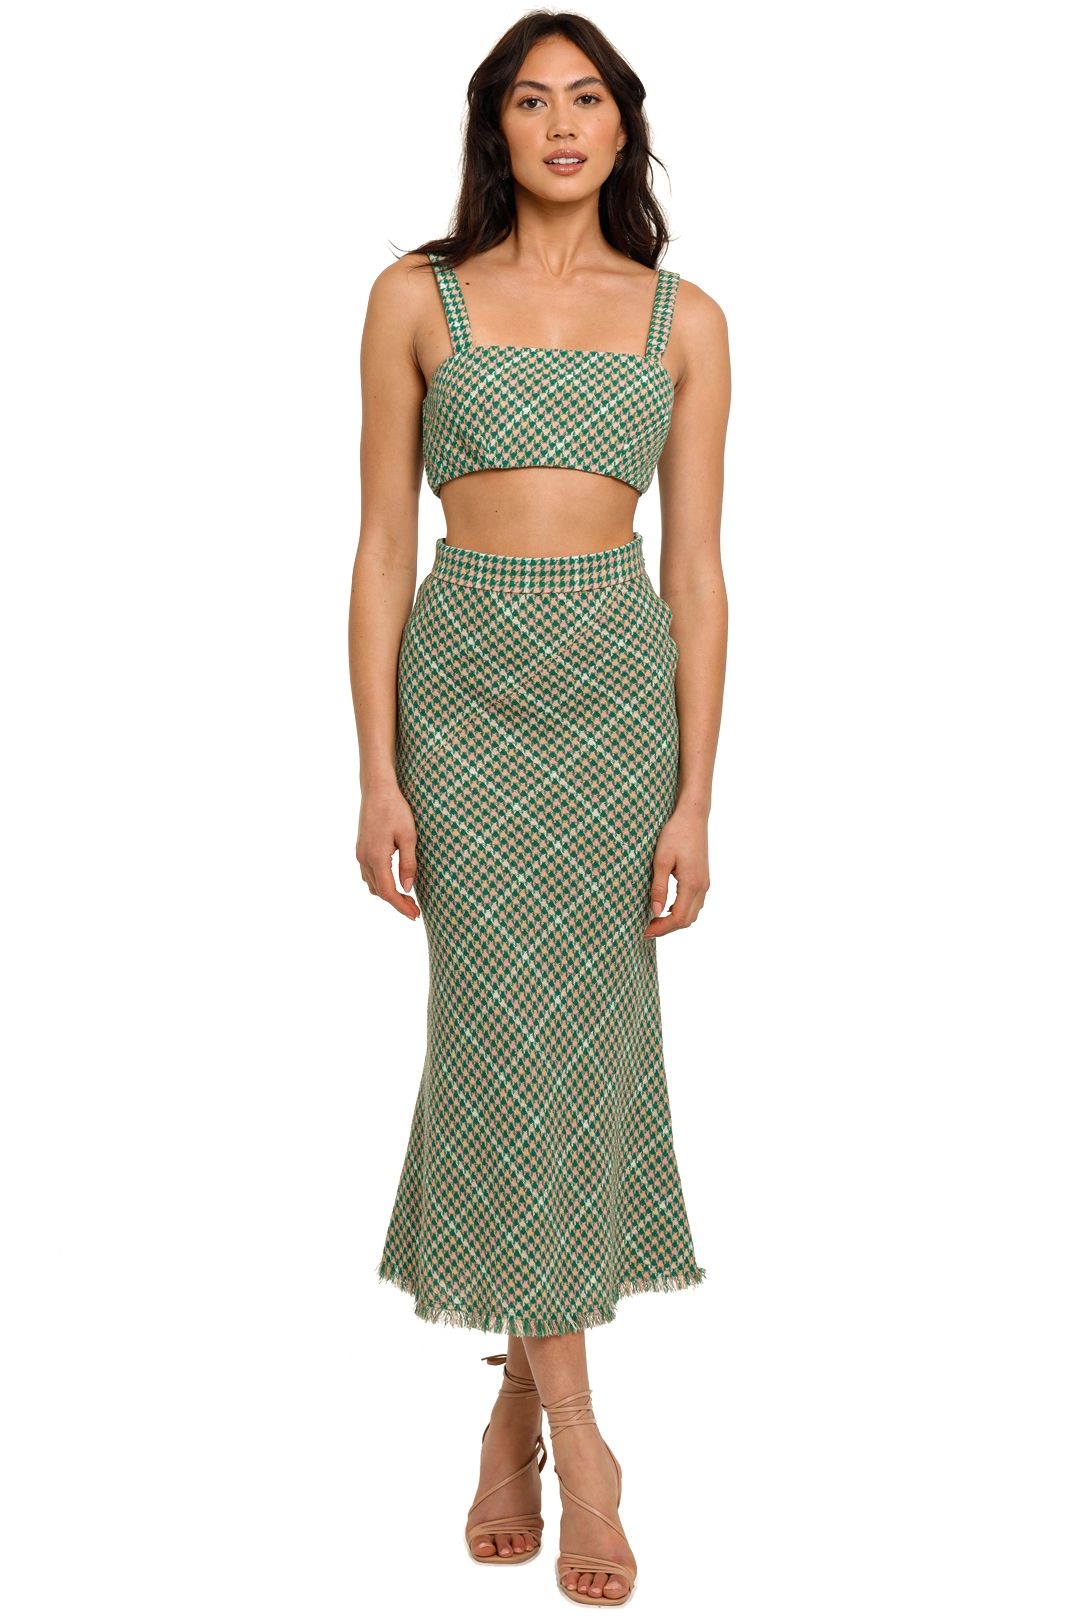 By Johnny Demi Tweed Bra and Skirt Set cropped